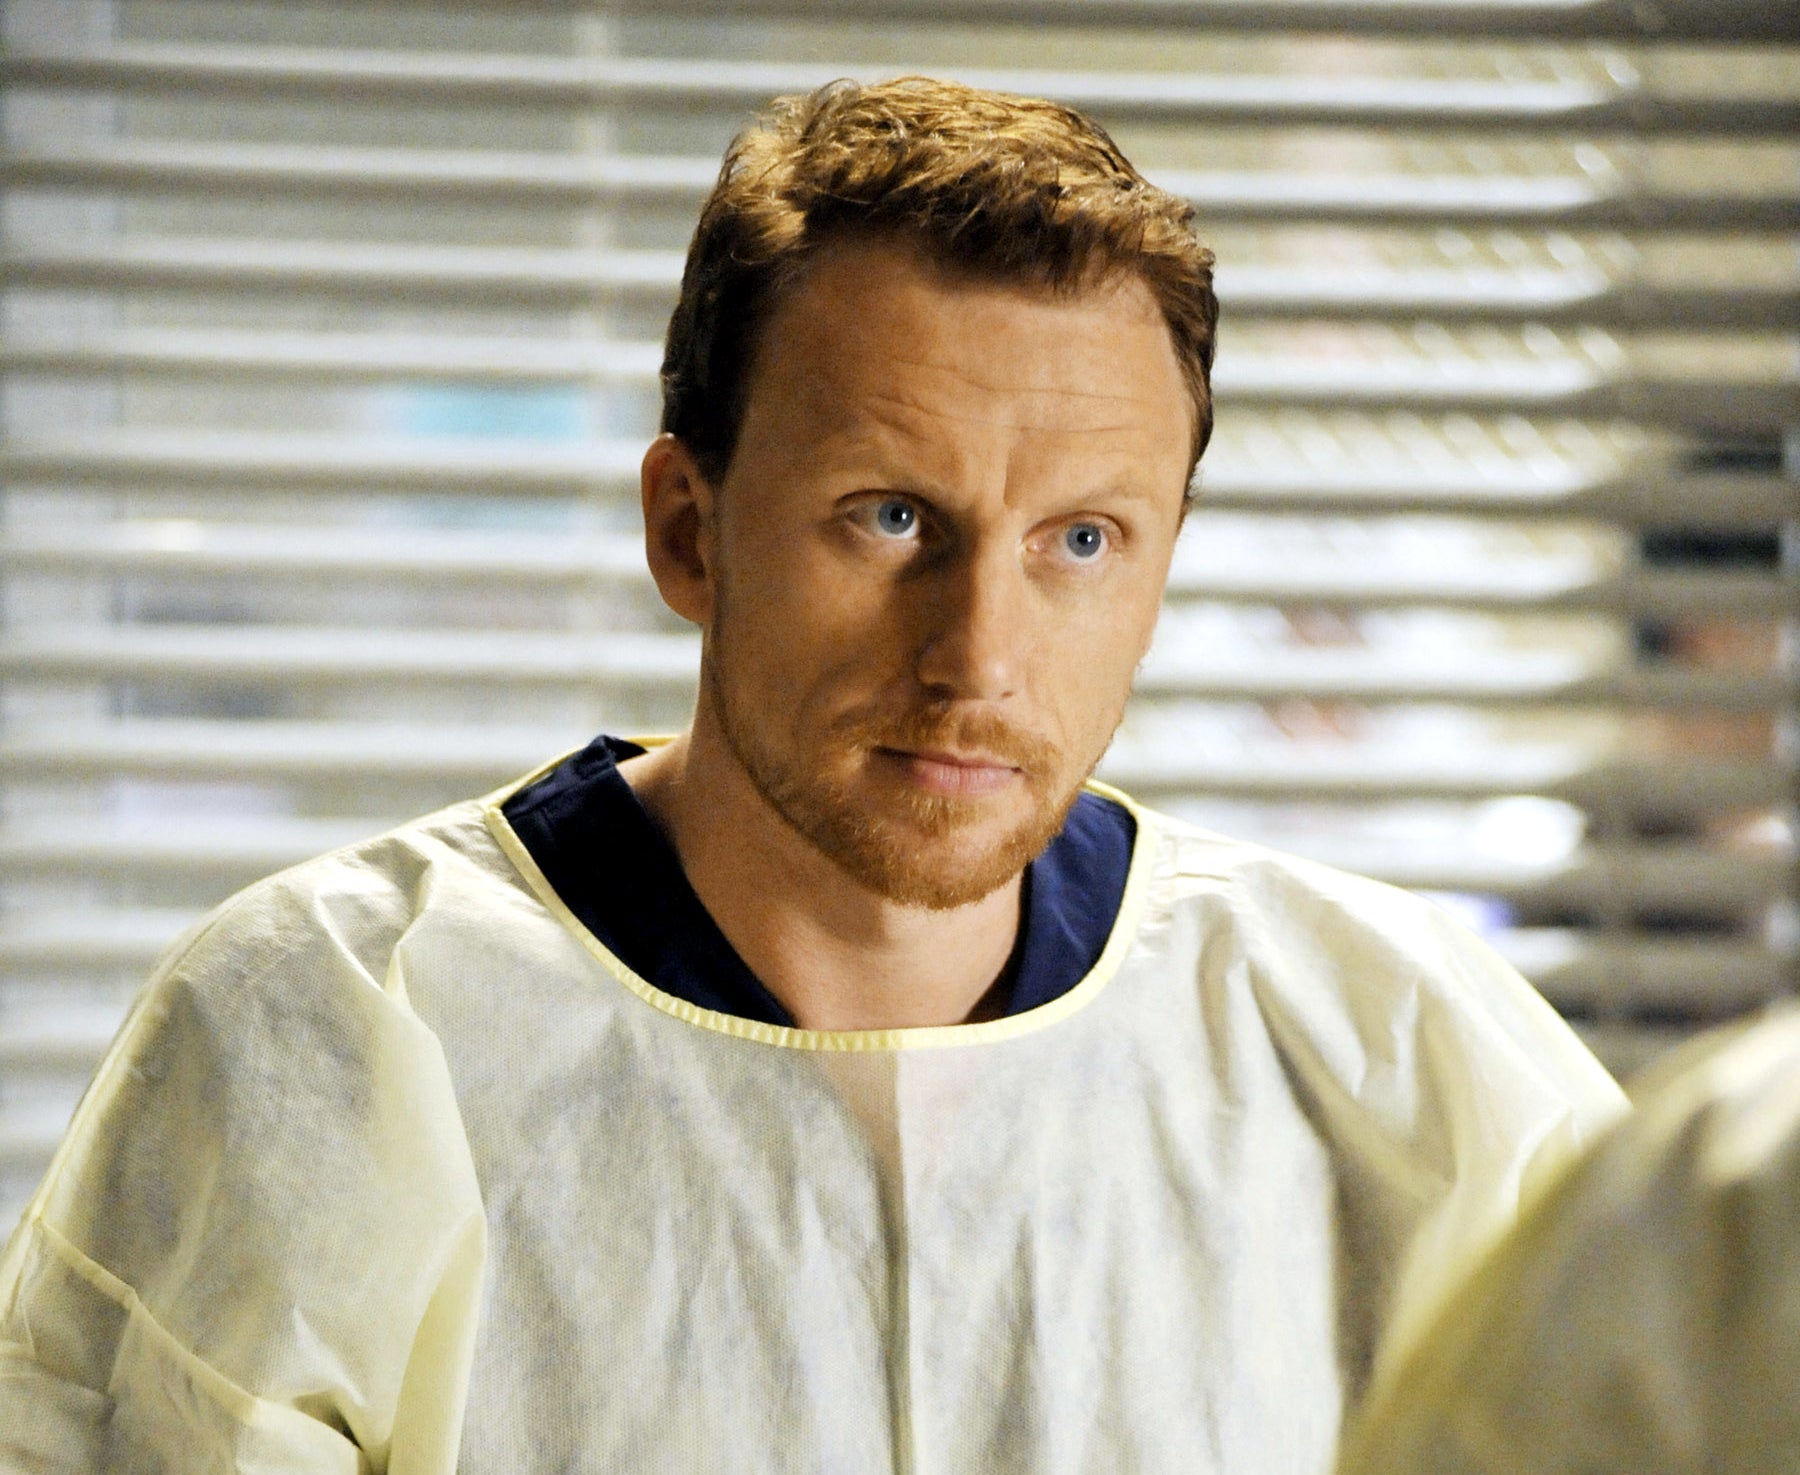 Owen Hunt from Grey&#x27;s Anatomy in scrubs, looking concerned in a hospital setting